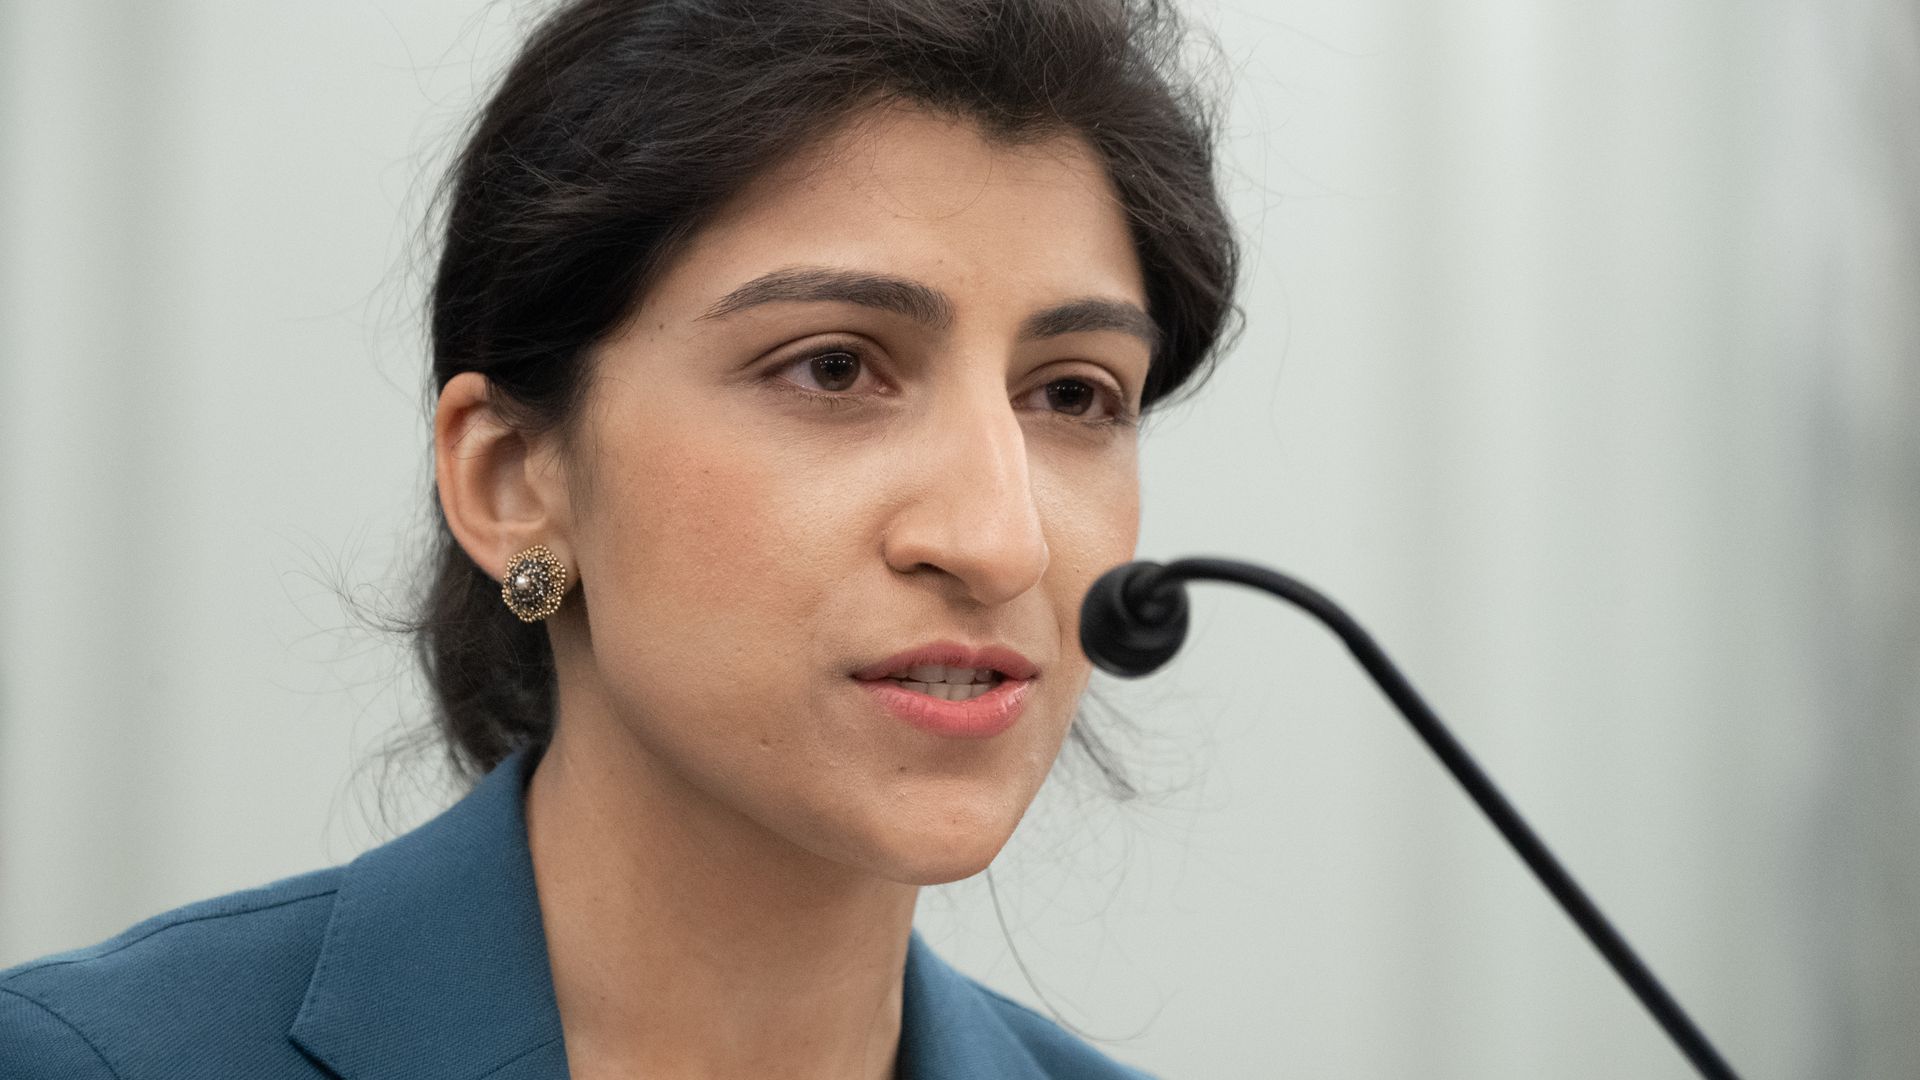 A photo of Lina Khan speaking at a microphone